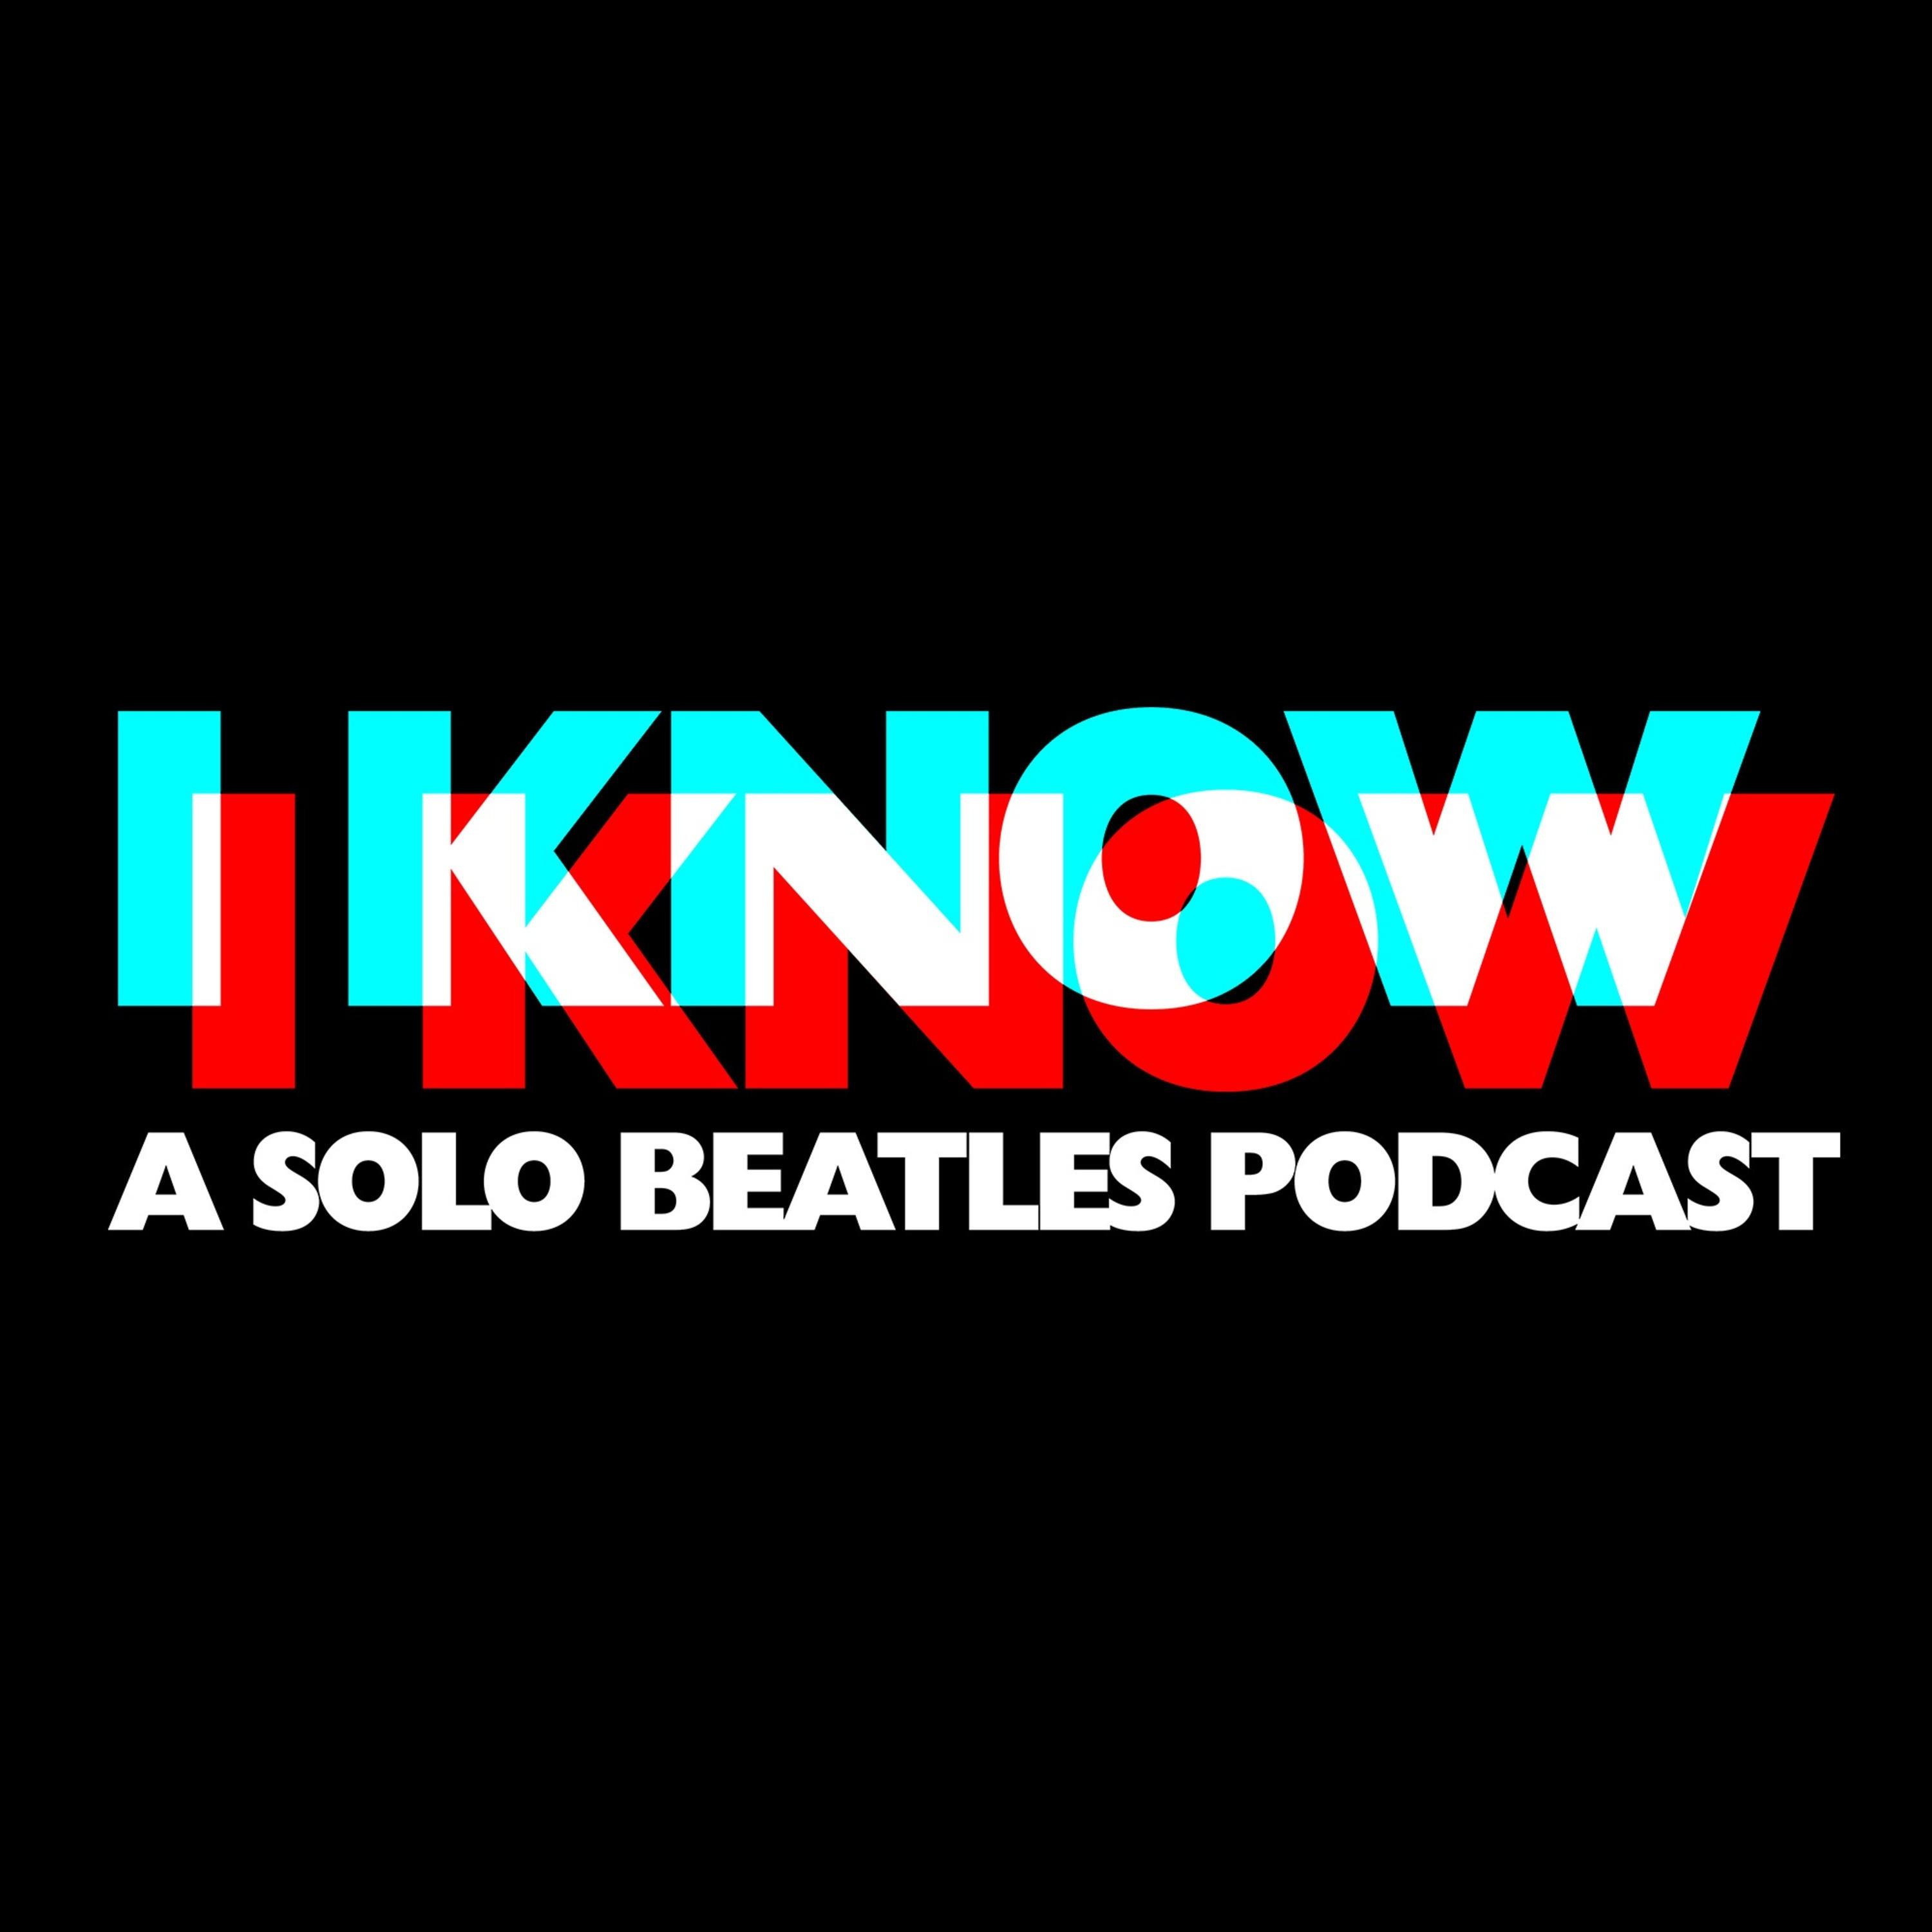 I Know I Know: A Solo Beatles Podcast